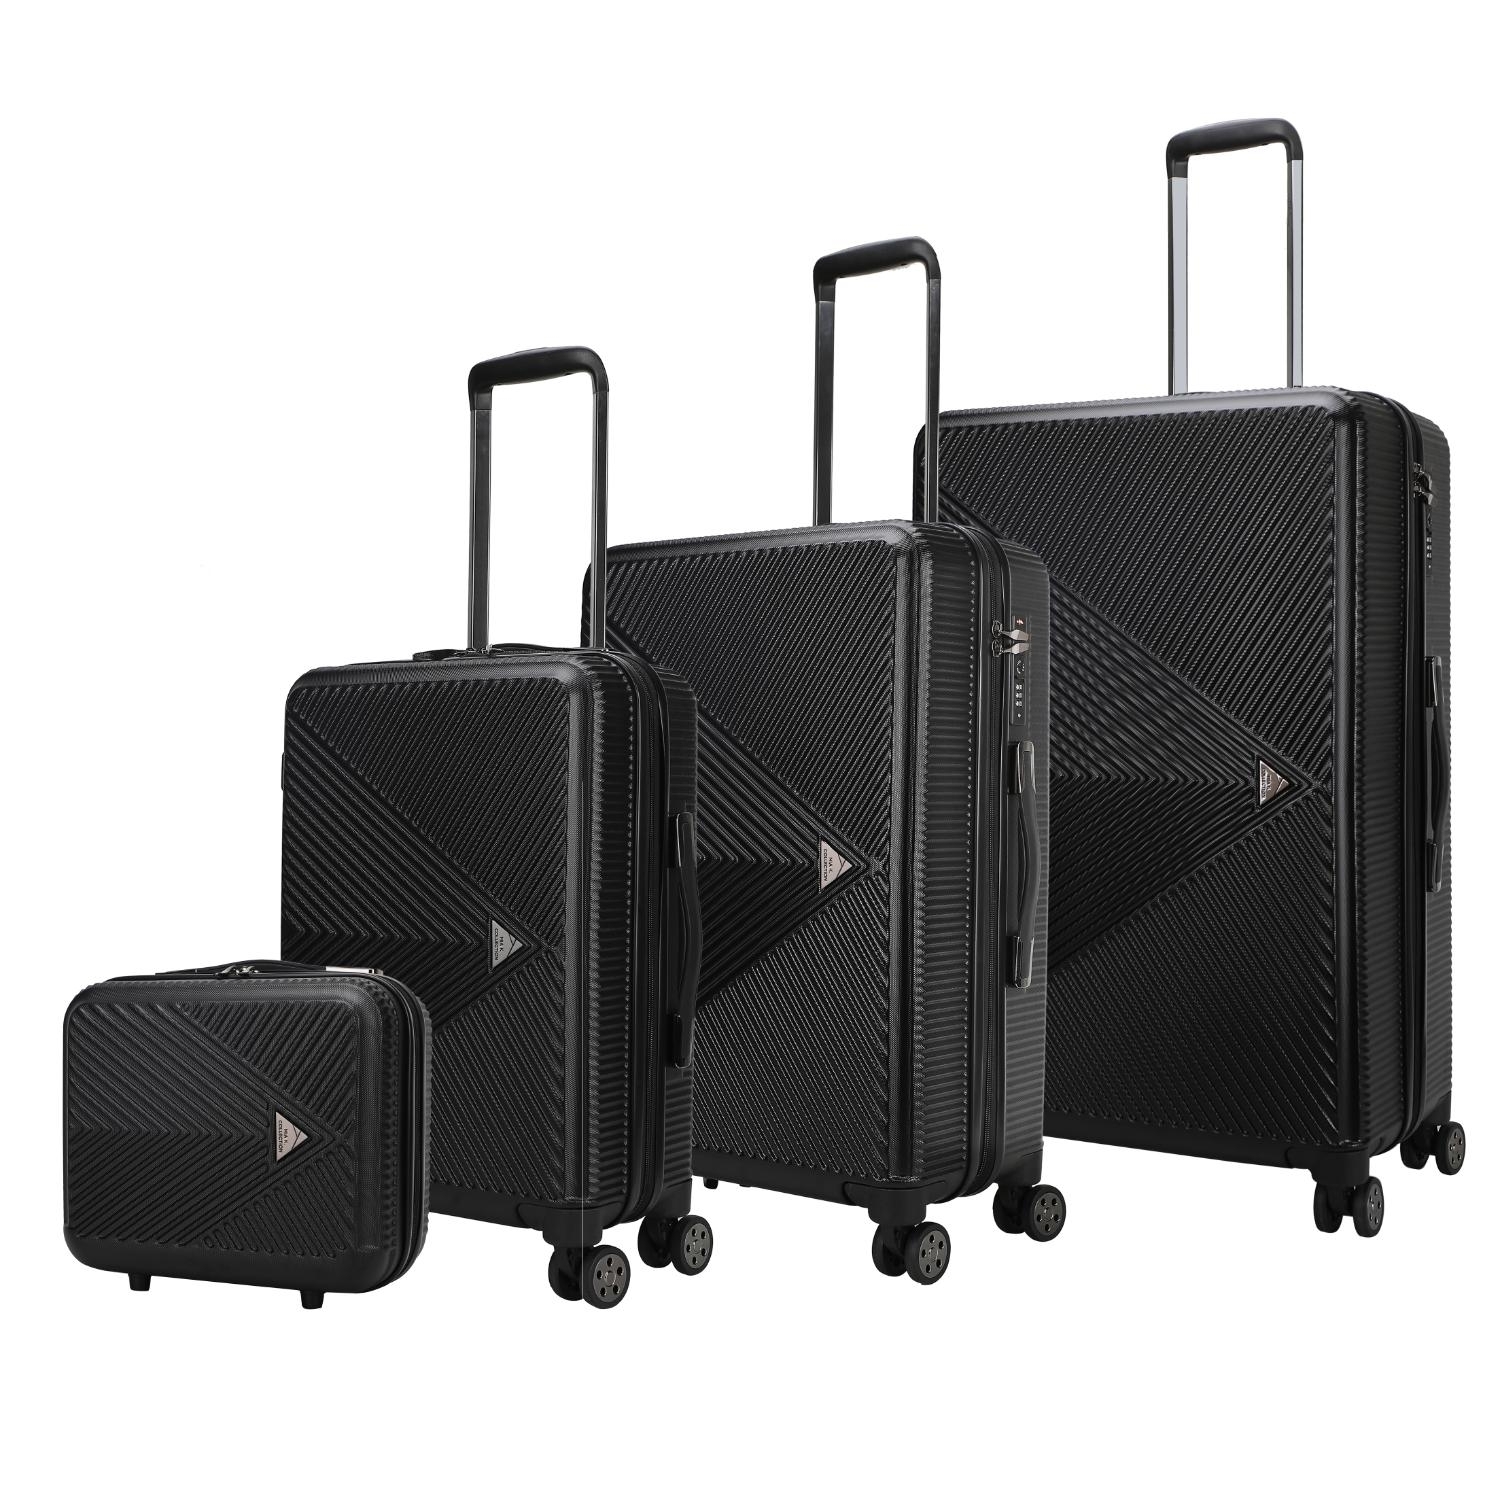 MKF Collection Felicity Luggage Set- 4-piece Set By Mia K - Navy